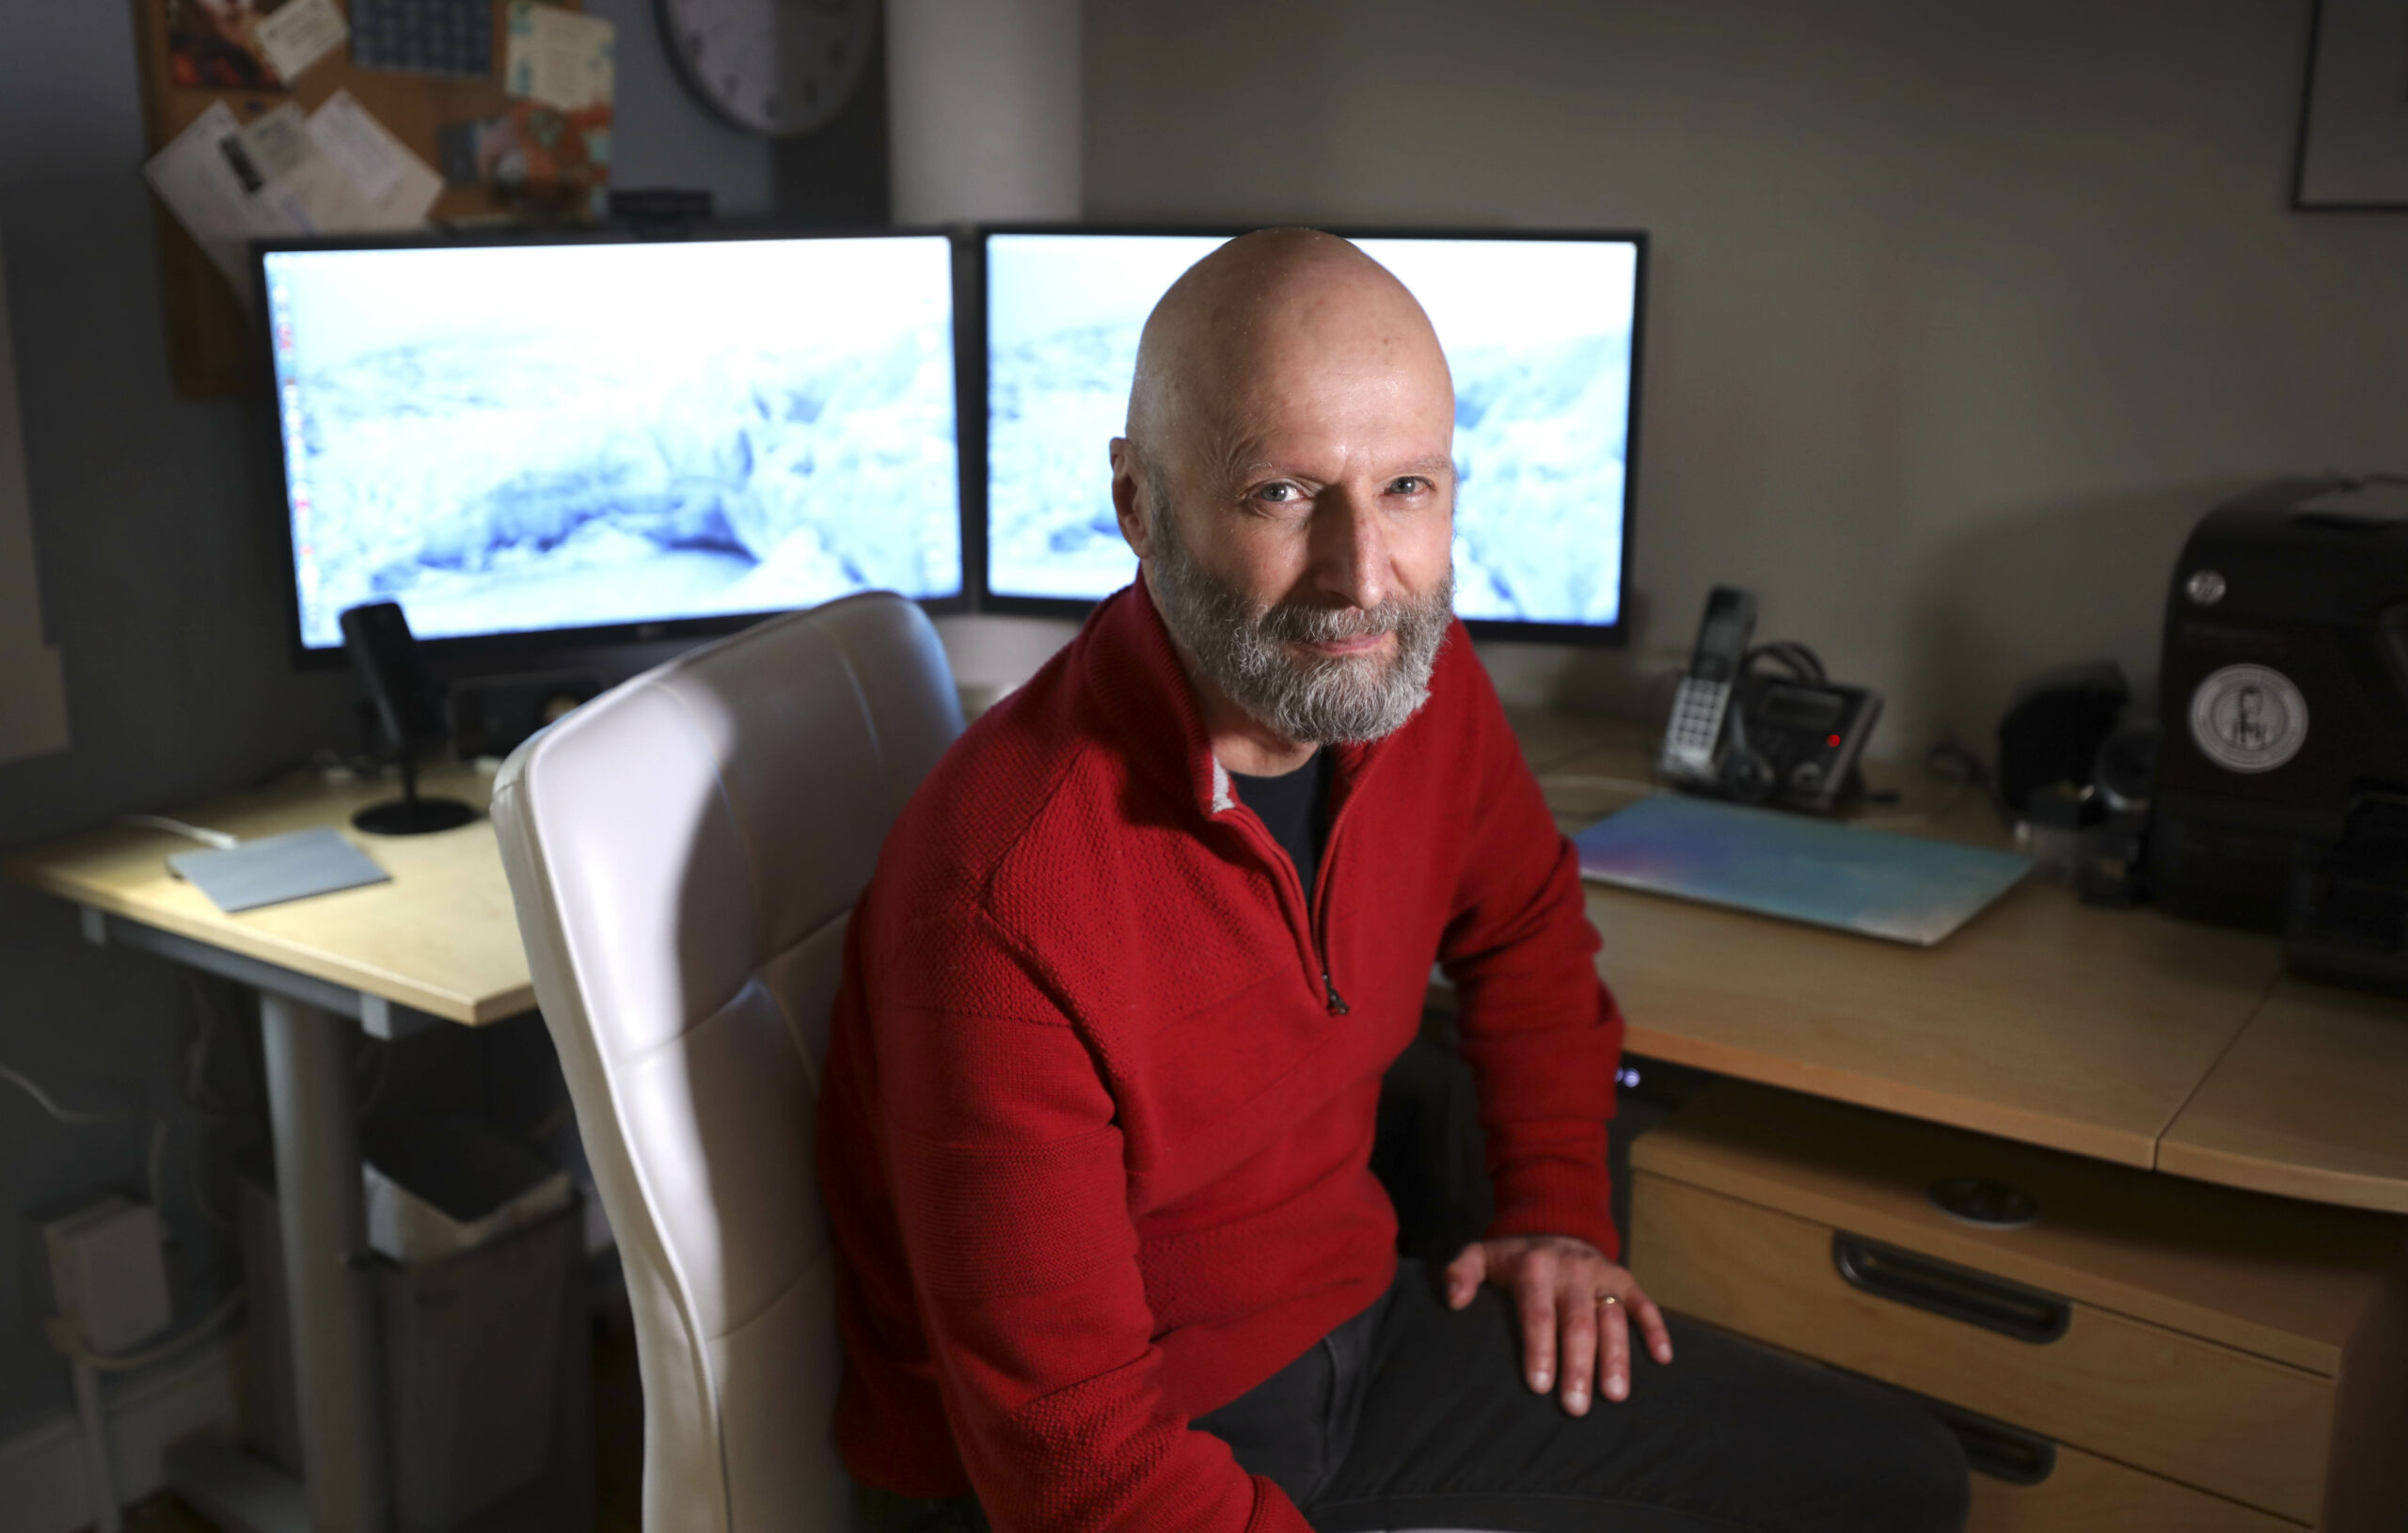 Engineer Curt Hull poses at his home in a red sweater in front of a dual-screen computer.